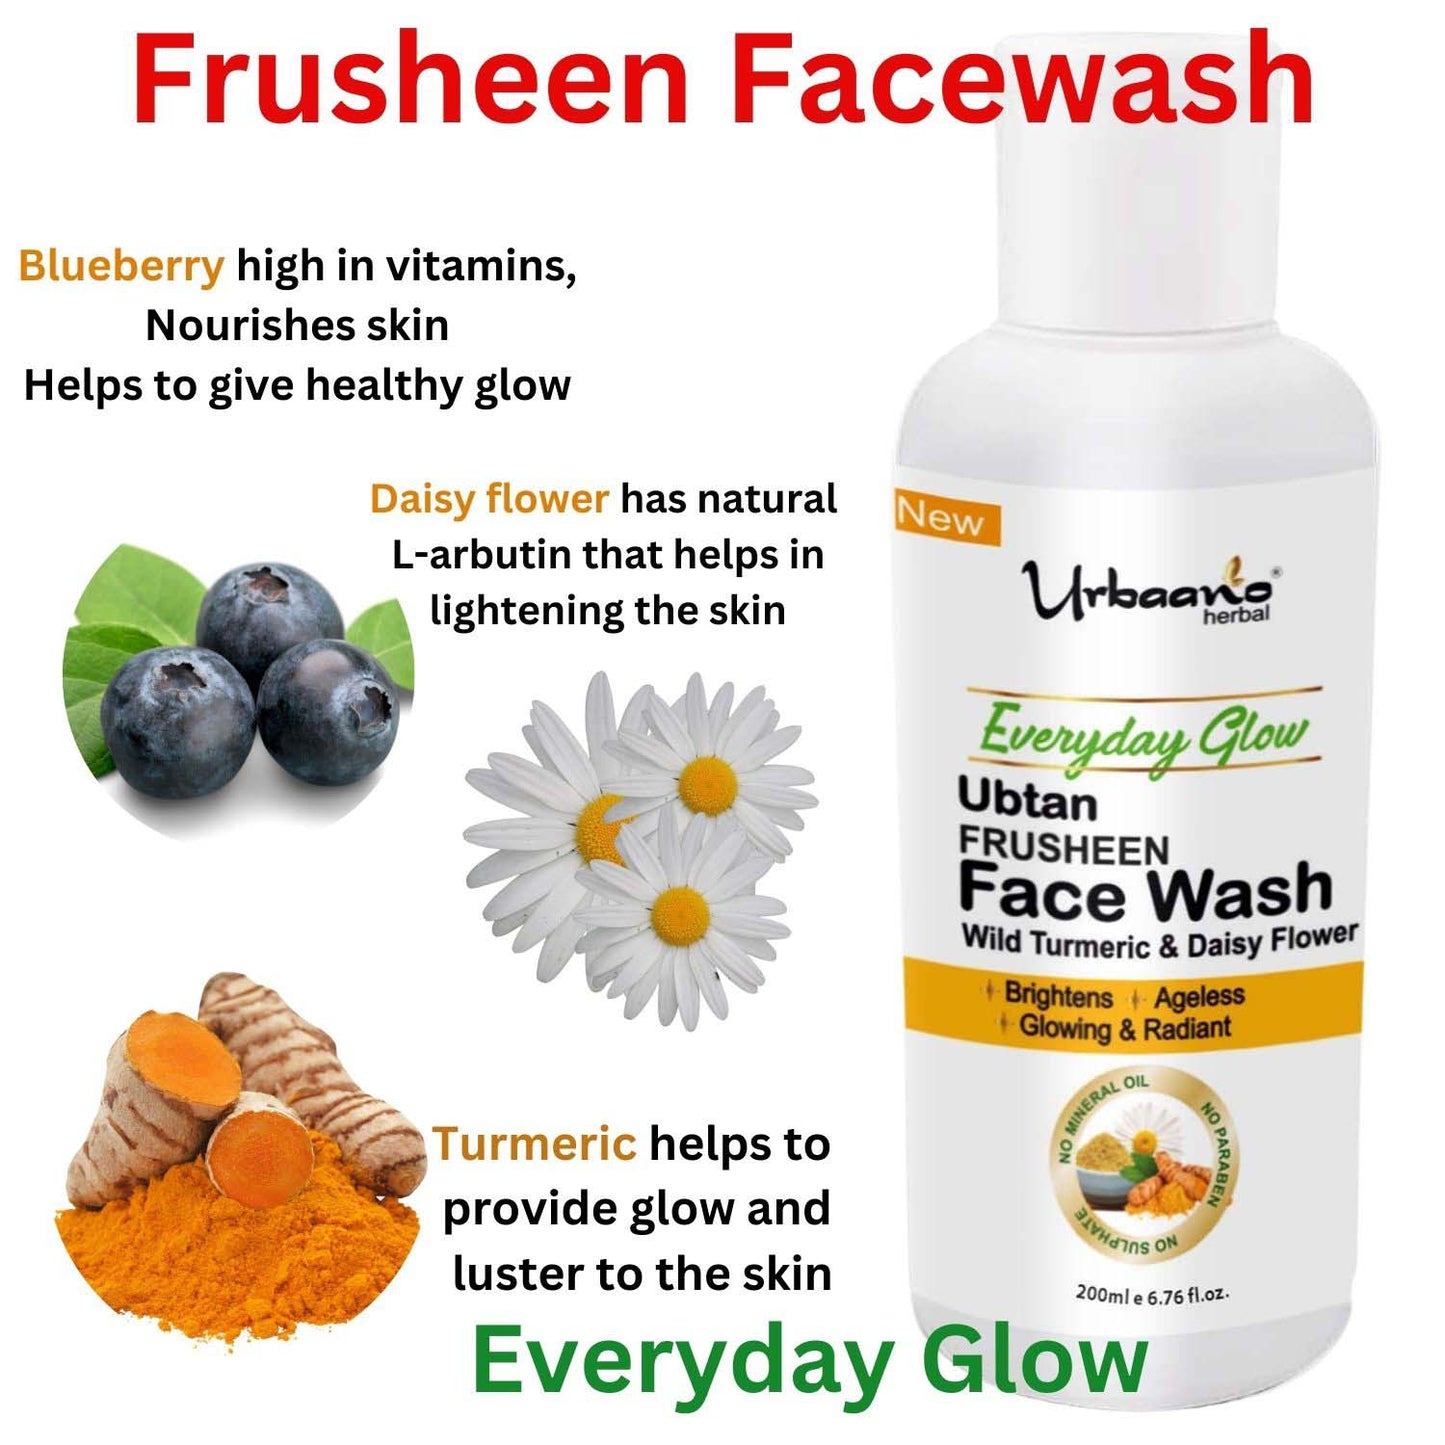 urbaano herbal frusheen sulphate free face wash ubtan infused with blueberry,daisy flower, wild turmeric, for skin lightening, reduce tan, fine lines, hydrates